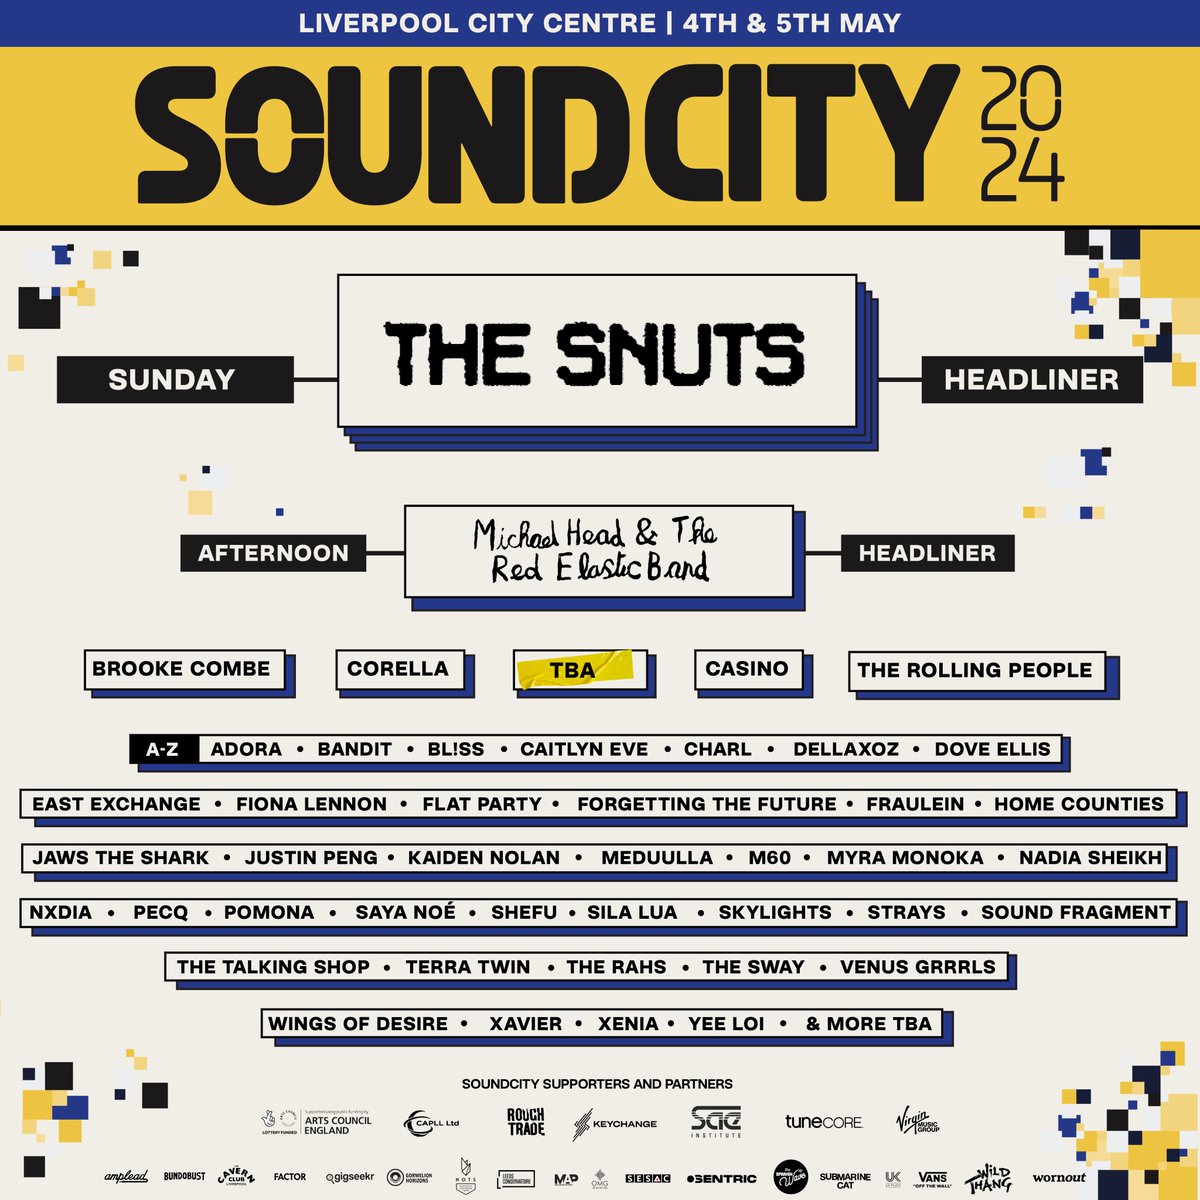 #ICYMI: Last week we made two huge announcements - our 2024 day splits, and our Sunday Afternoon Headliner, @michaelheadtreb! Tag that mate who's STILL waiting to get their tickets 👇 Tickets are flying out 💨 Secure yours at soundcity.seetickets.com 🎟️